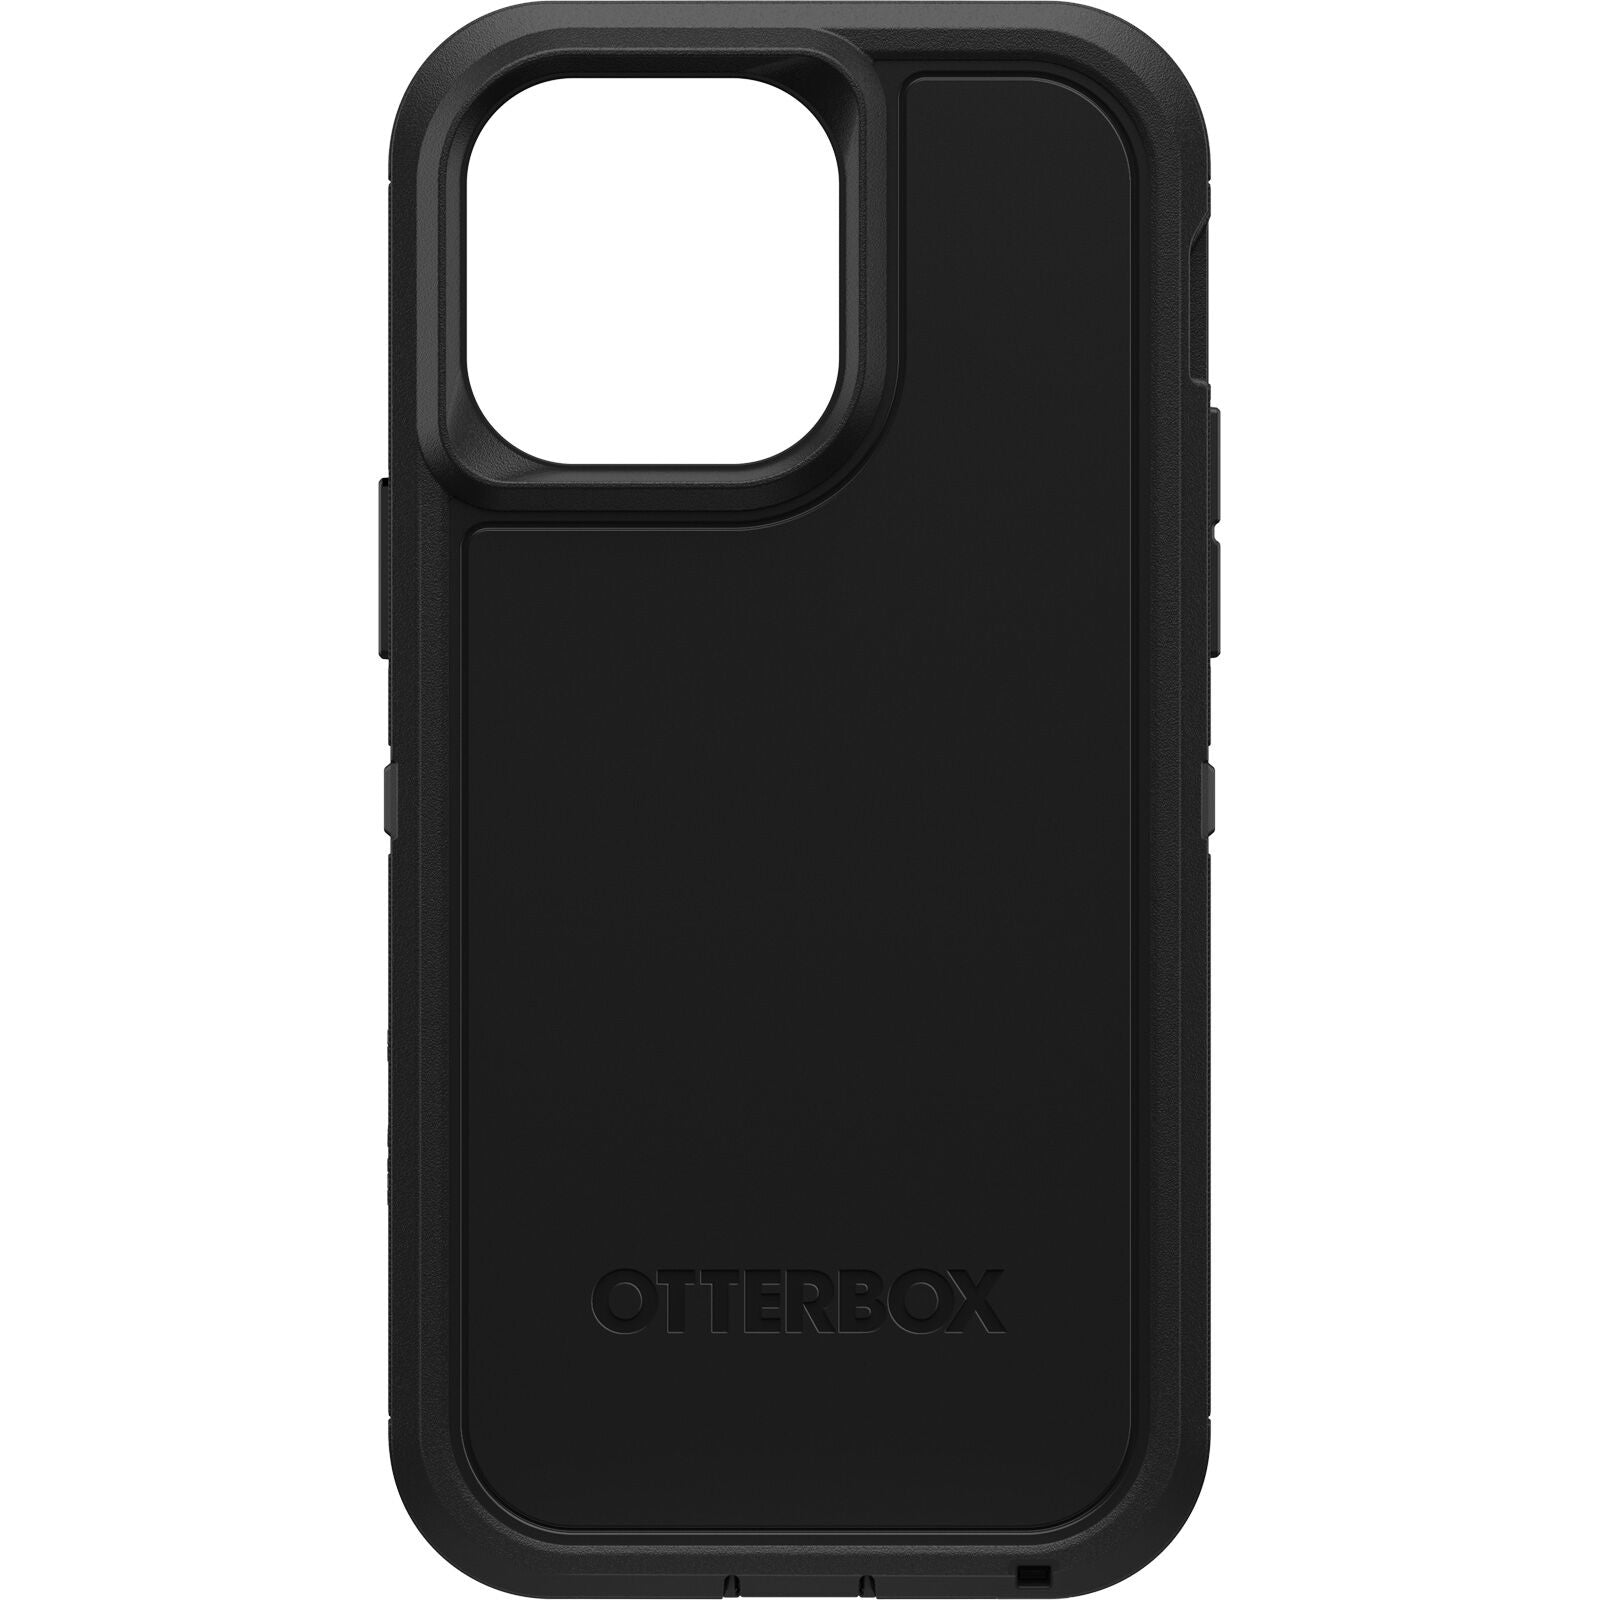 OtterBox Defender XT Series for Apple iPhone (Black)